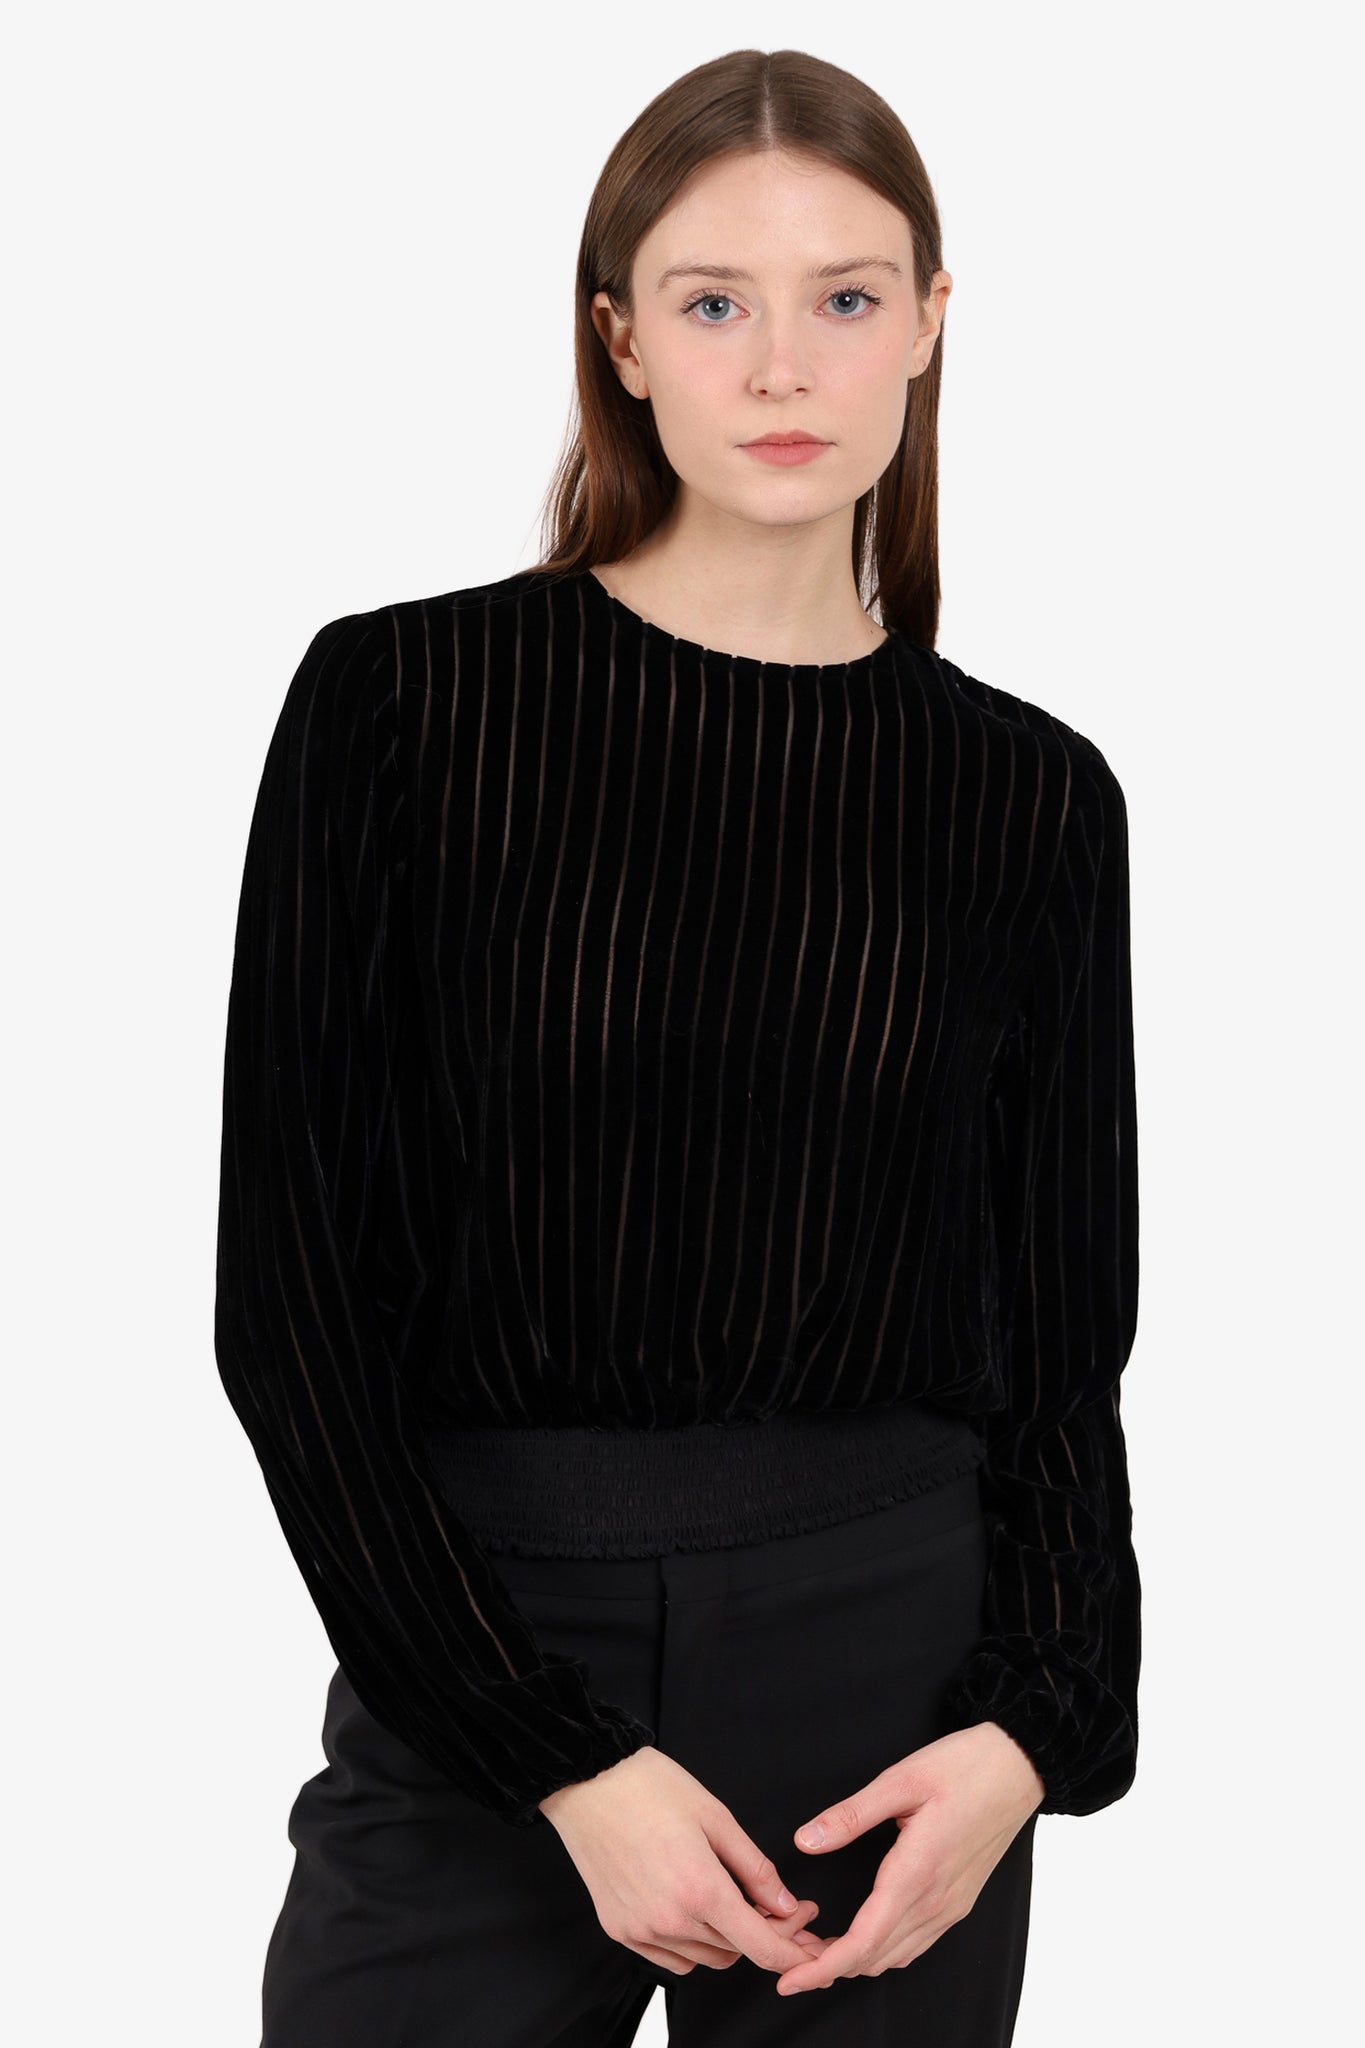 Cami NYC Black Velvet Striped Cut-out Top size Small – Mine & Yours